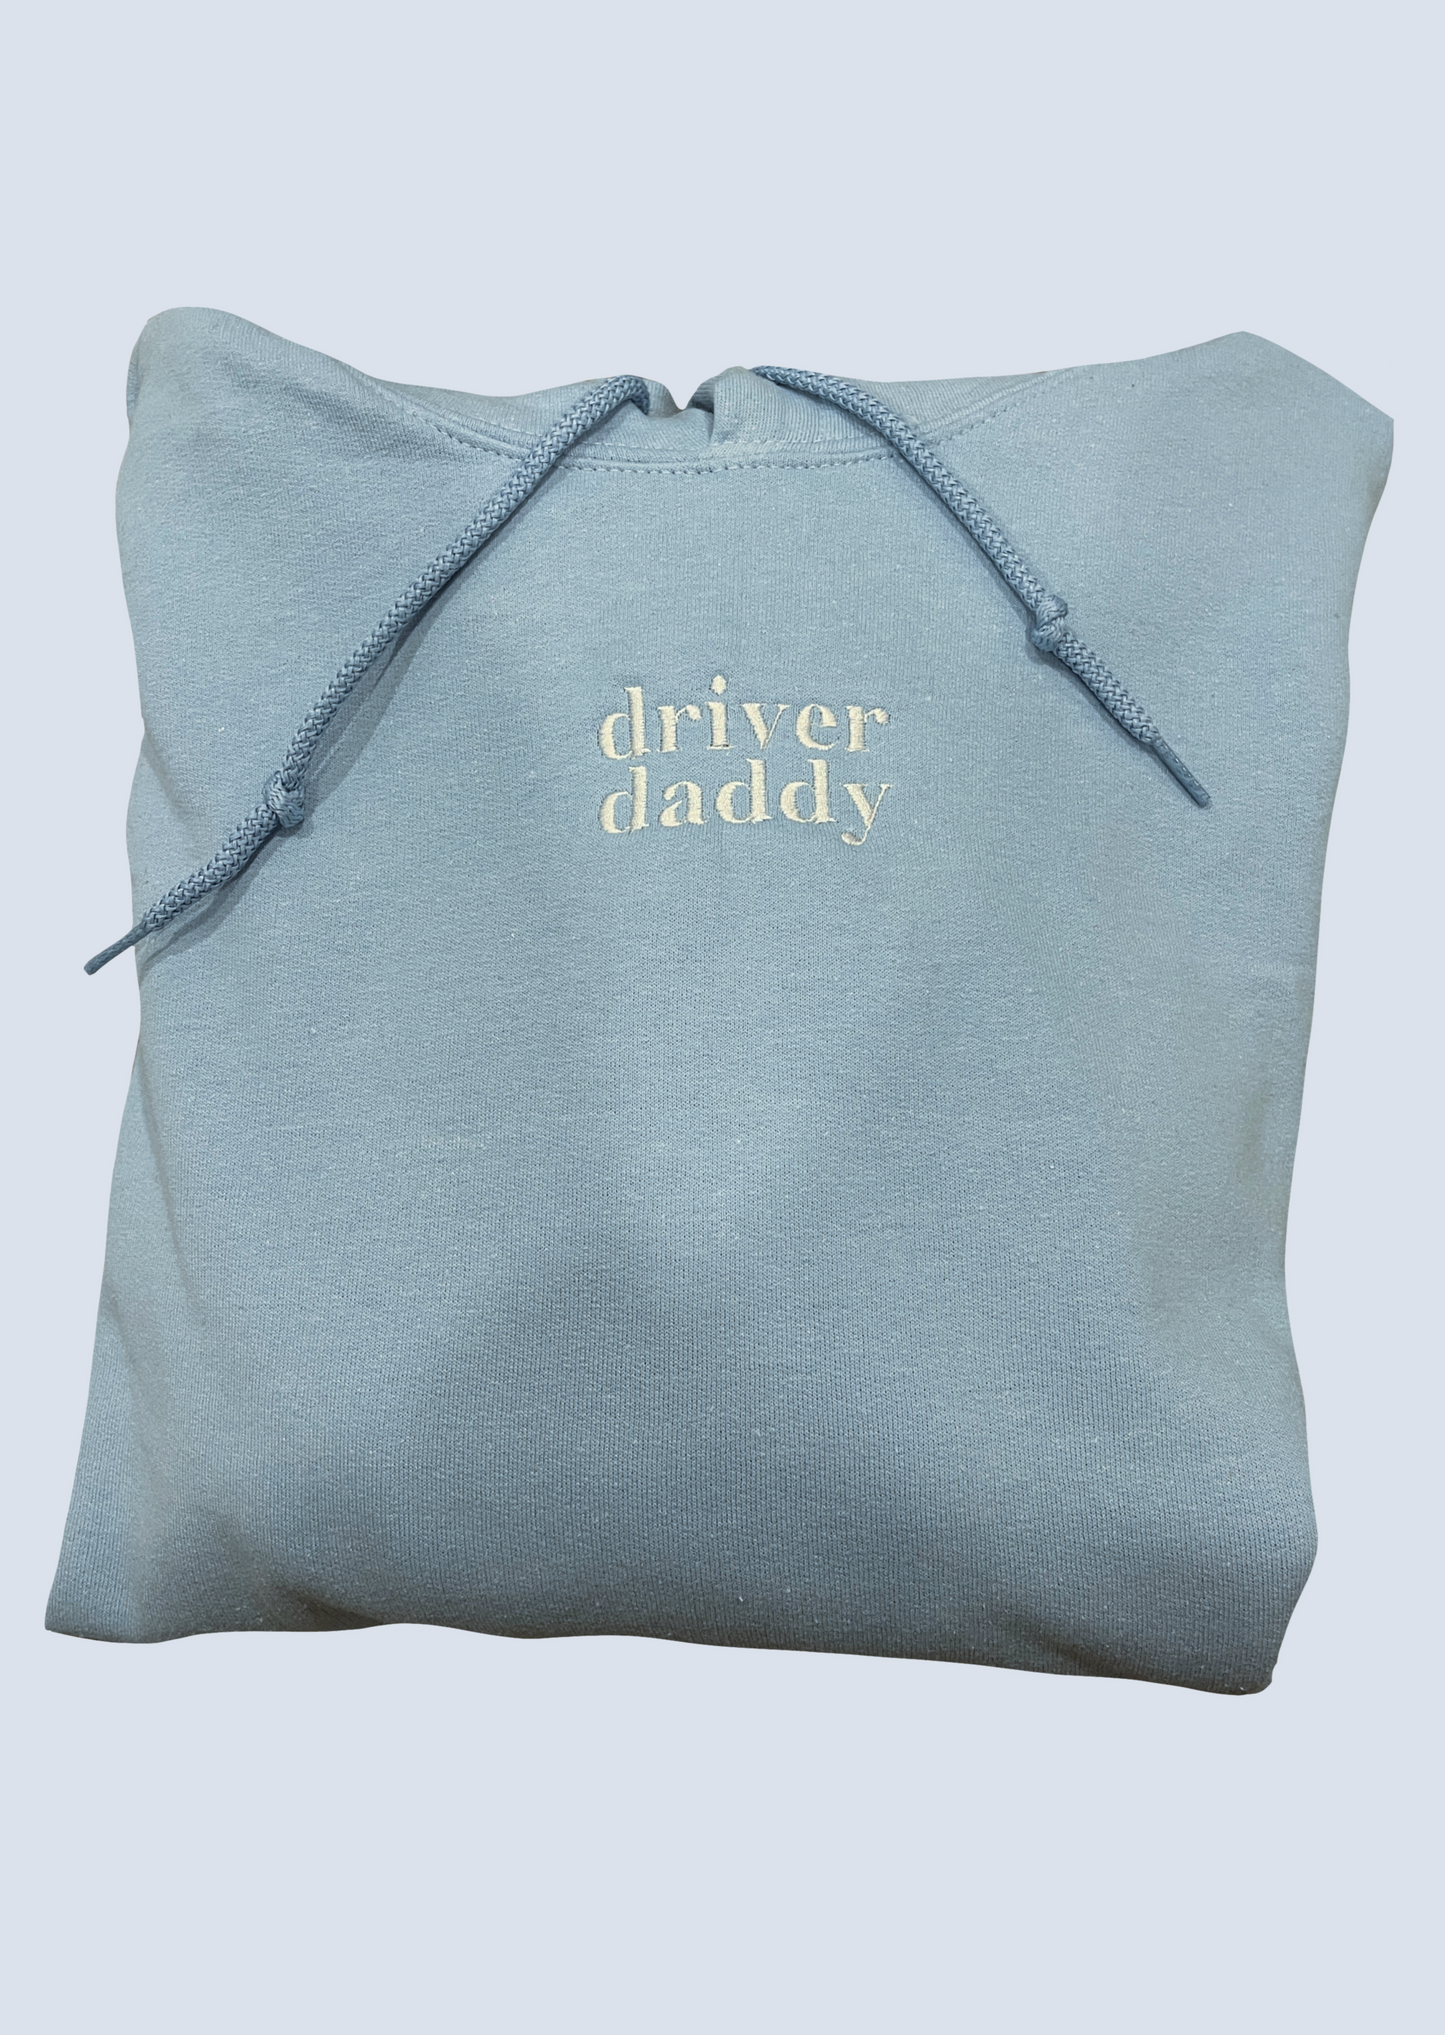 Driver Daddy Embroidery